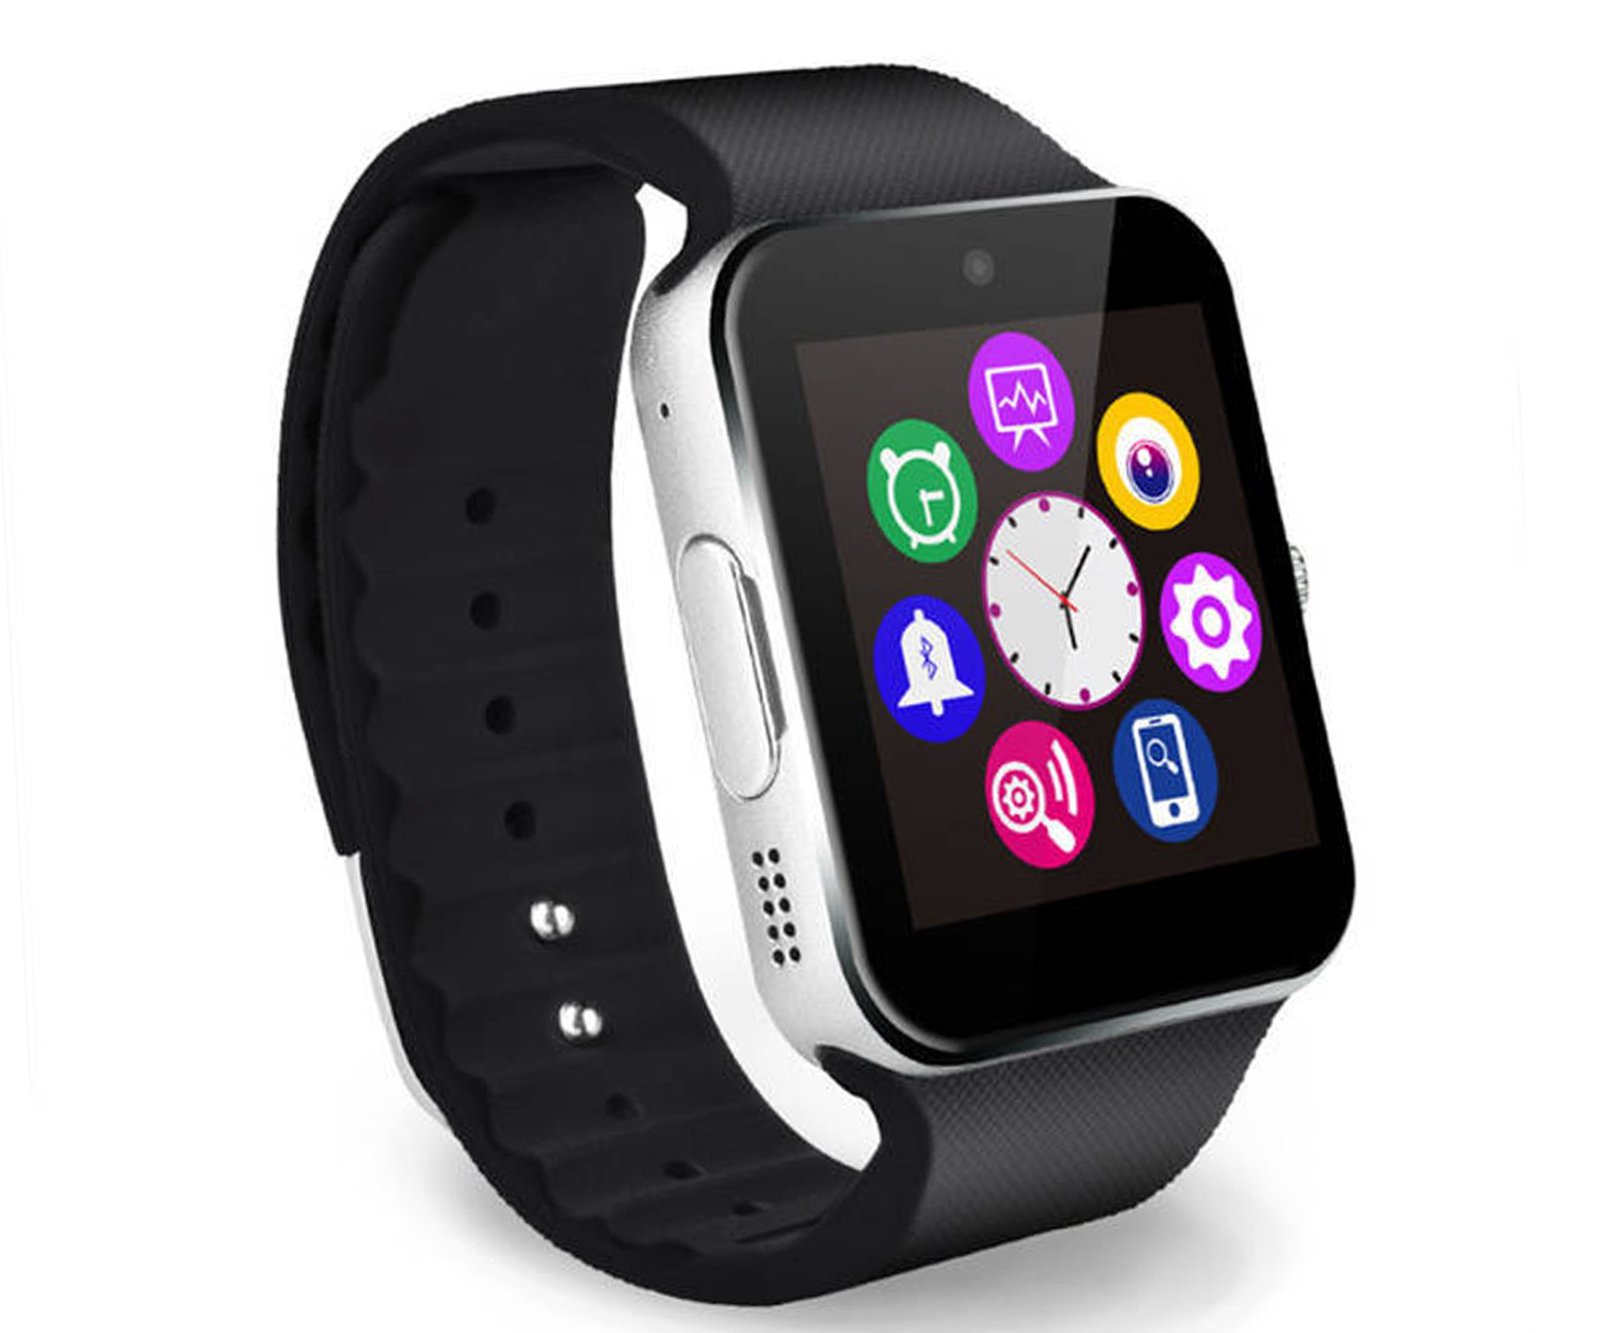 Functionality and Adaptability of Android Watch